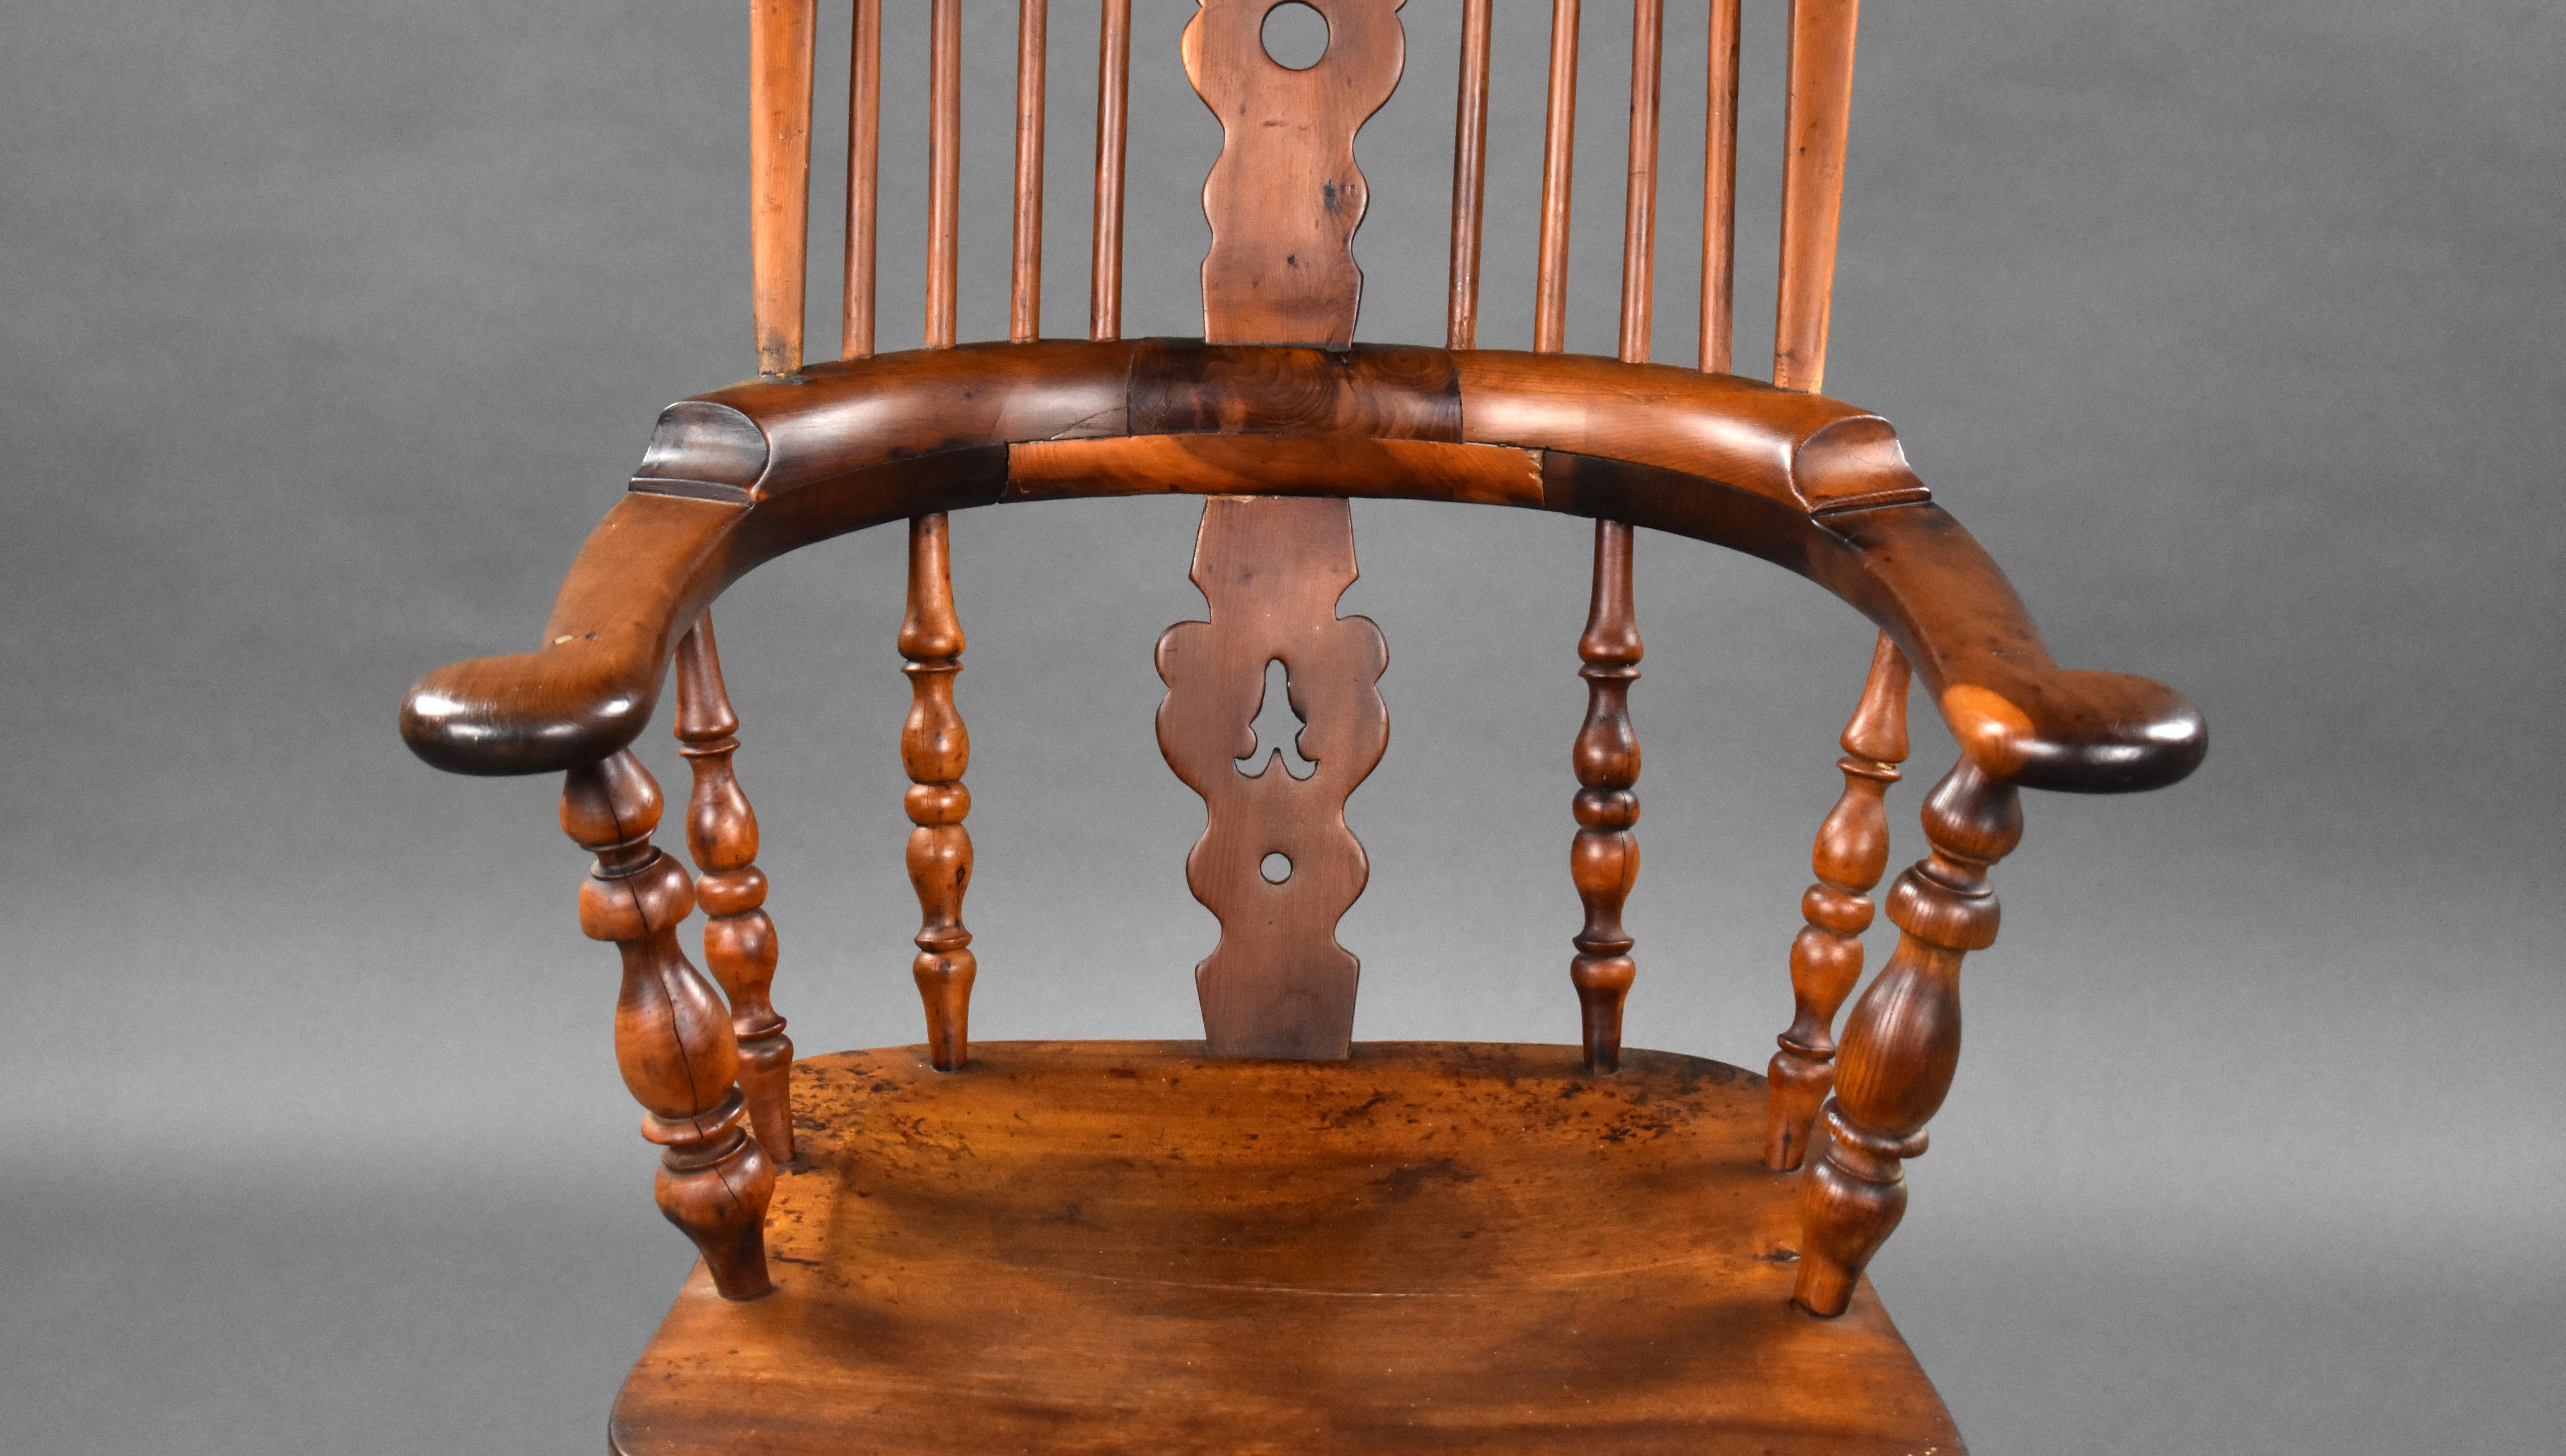 19th Century English Yew Wood High Back Broad Arm Windsor Chair For Sale 3